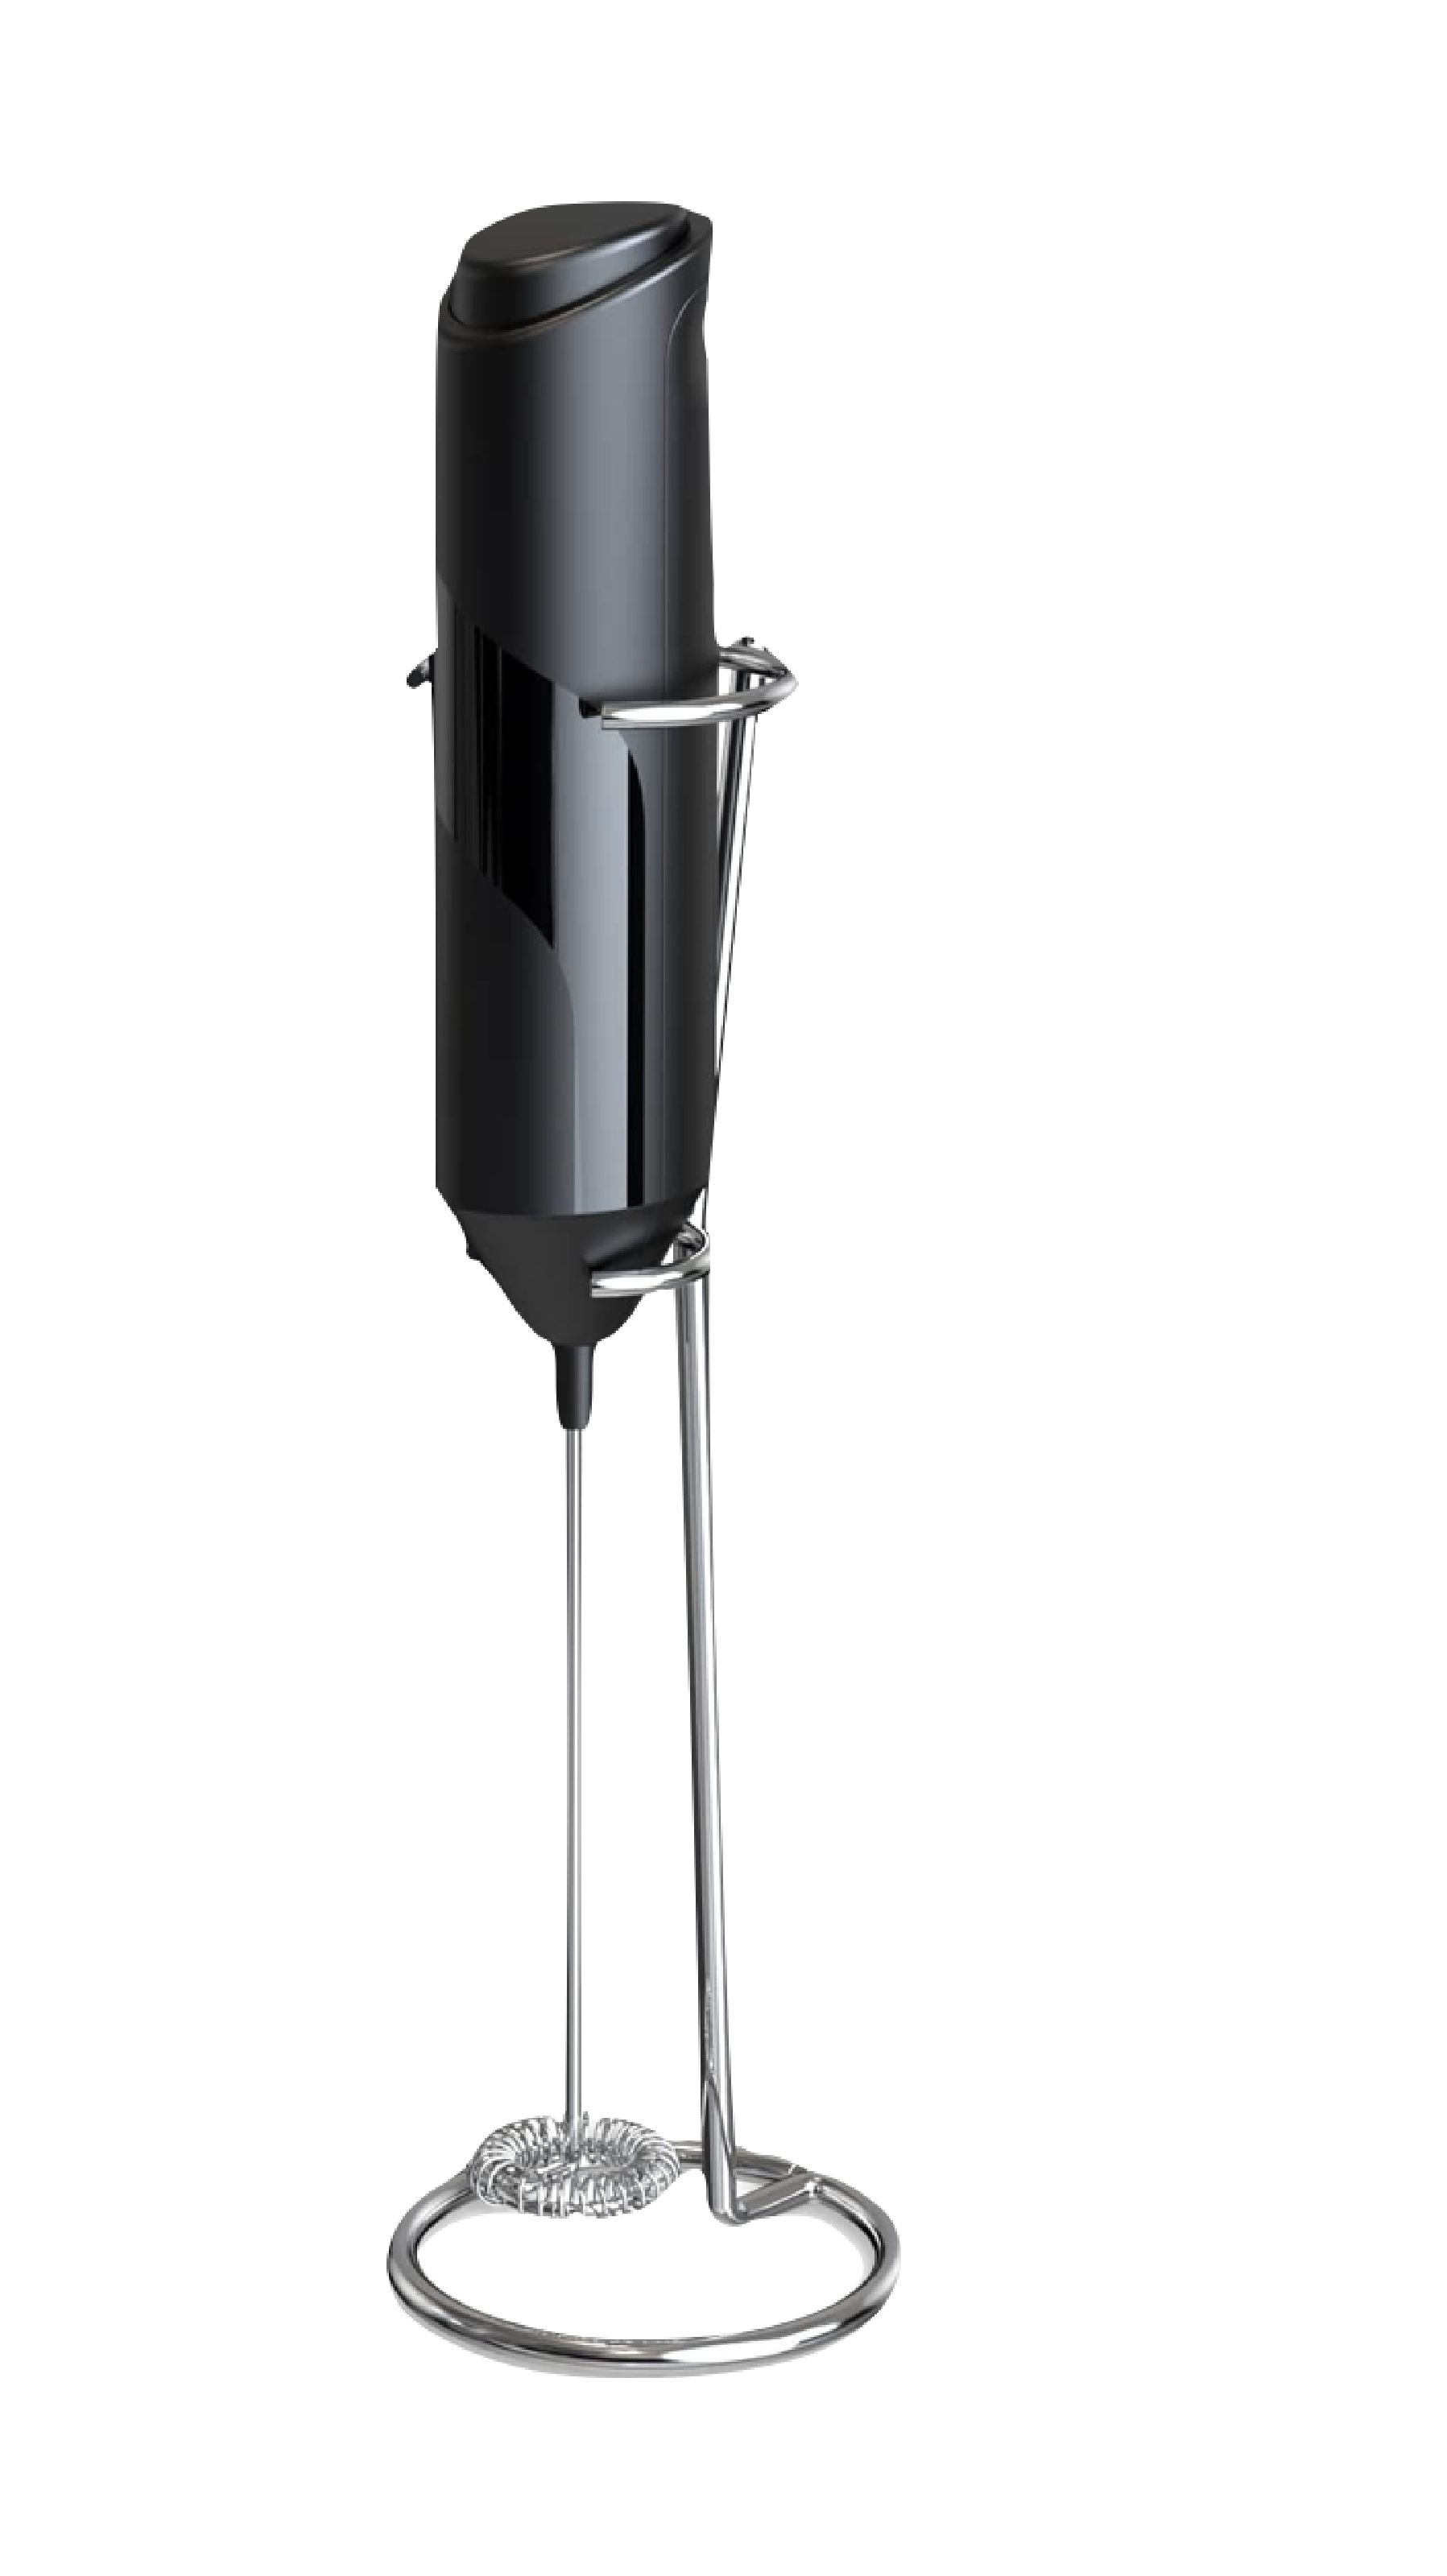 Electric Milk Frother, Coffee Frother